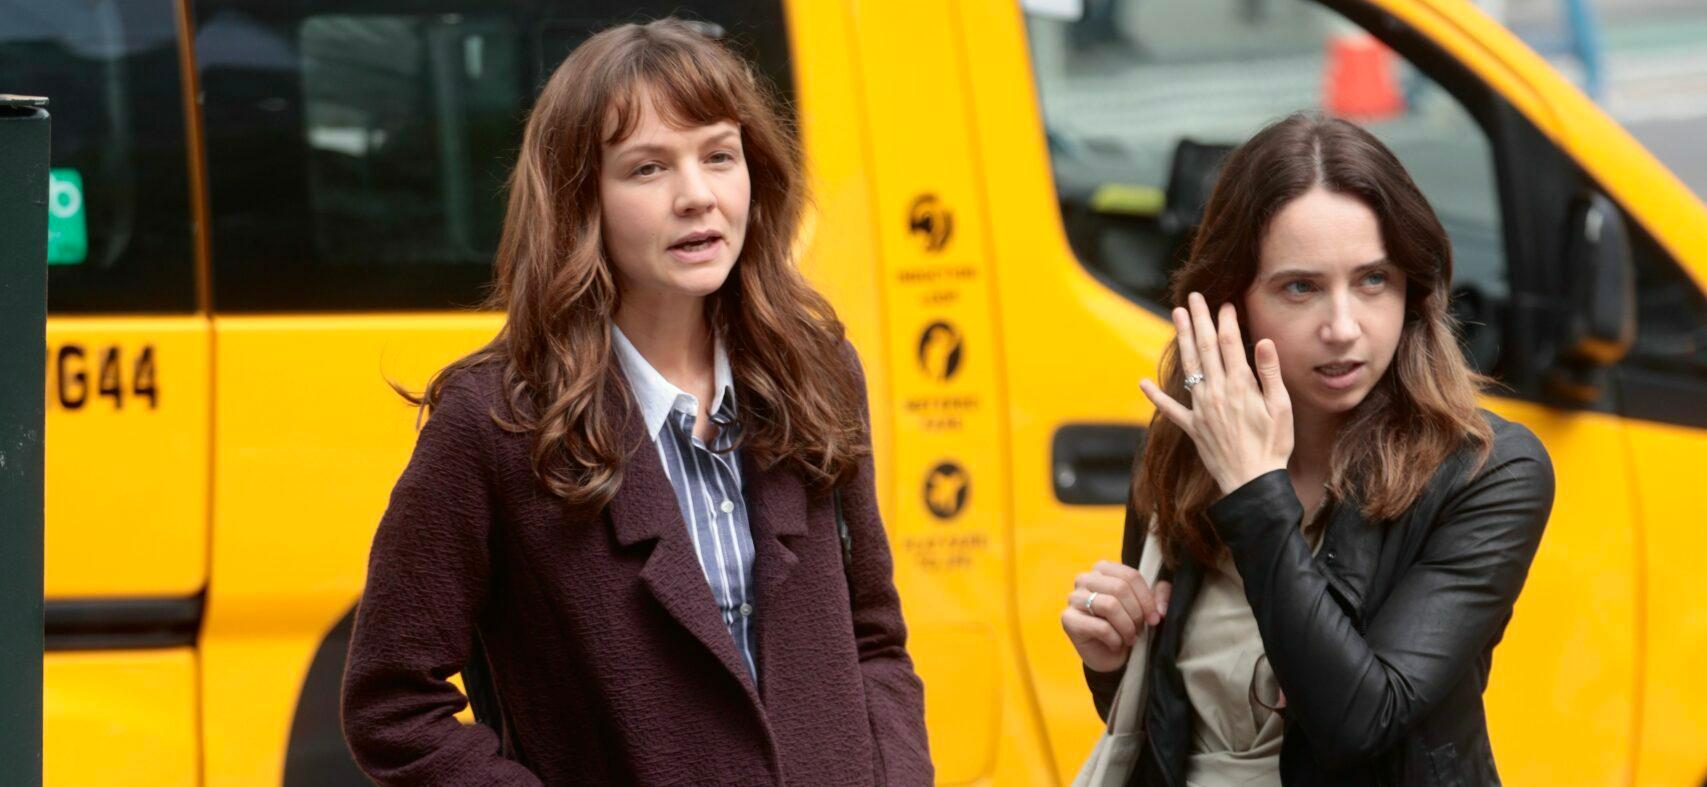 Carey Mulligan and Zoe Kazan filming She Said the story of Ny Times reporters tracking Harvey Weinstein